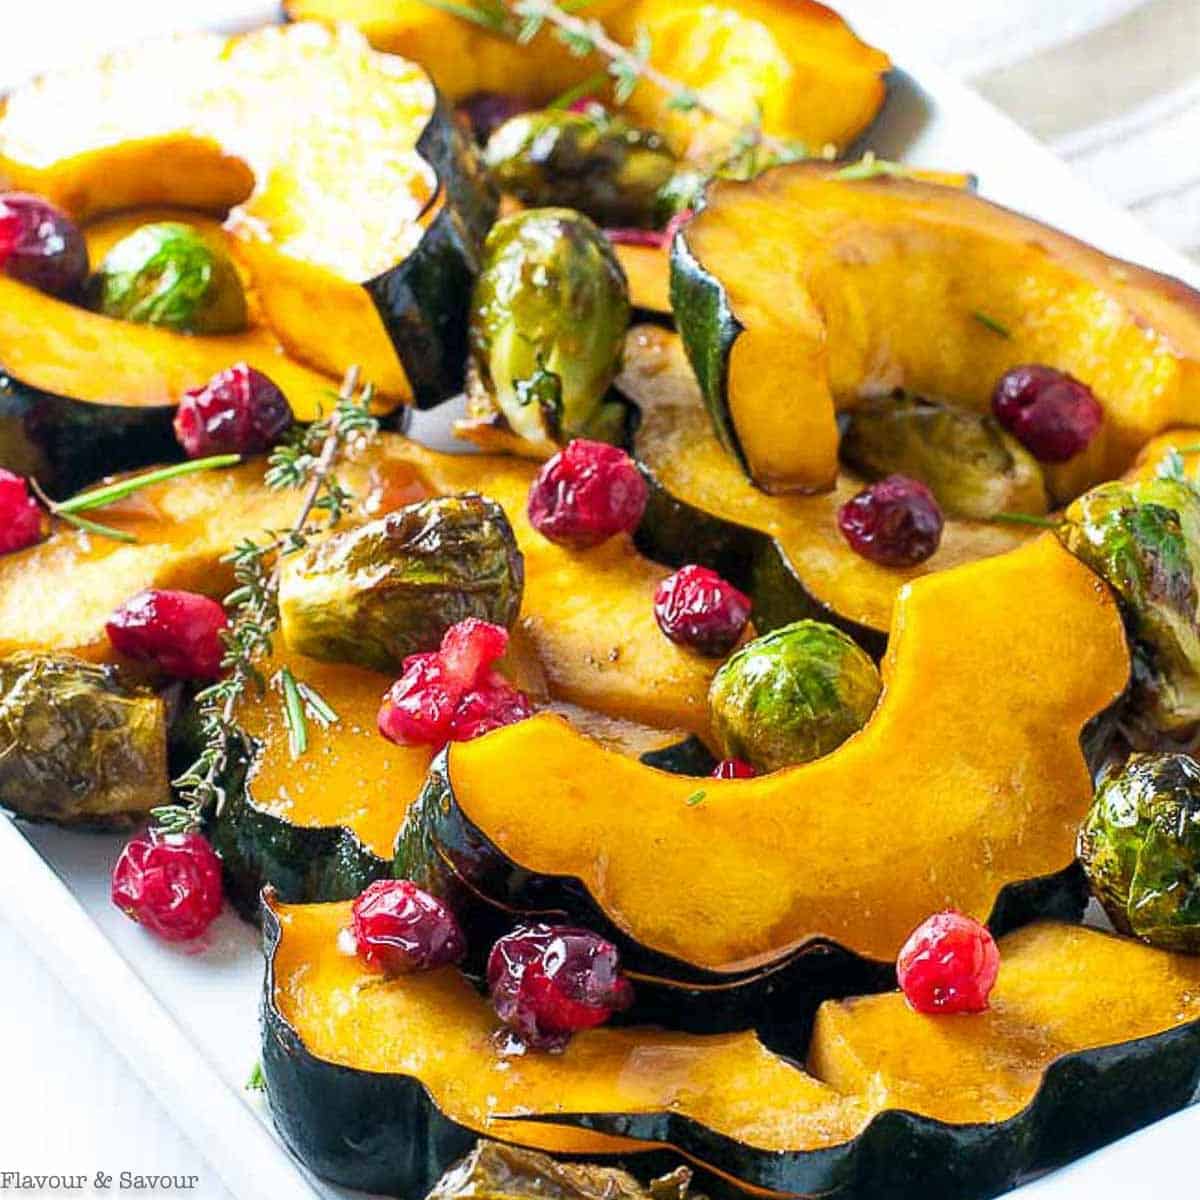 Honey Balsamic Roasted Acorn Squash and Brussels Sprouts from https://www.flavourandsavour.com/